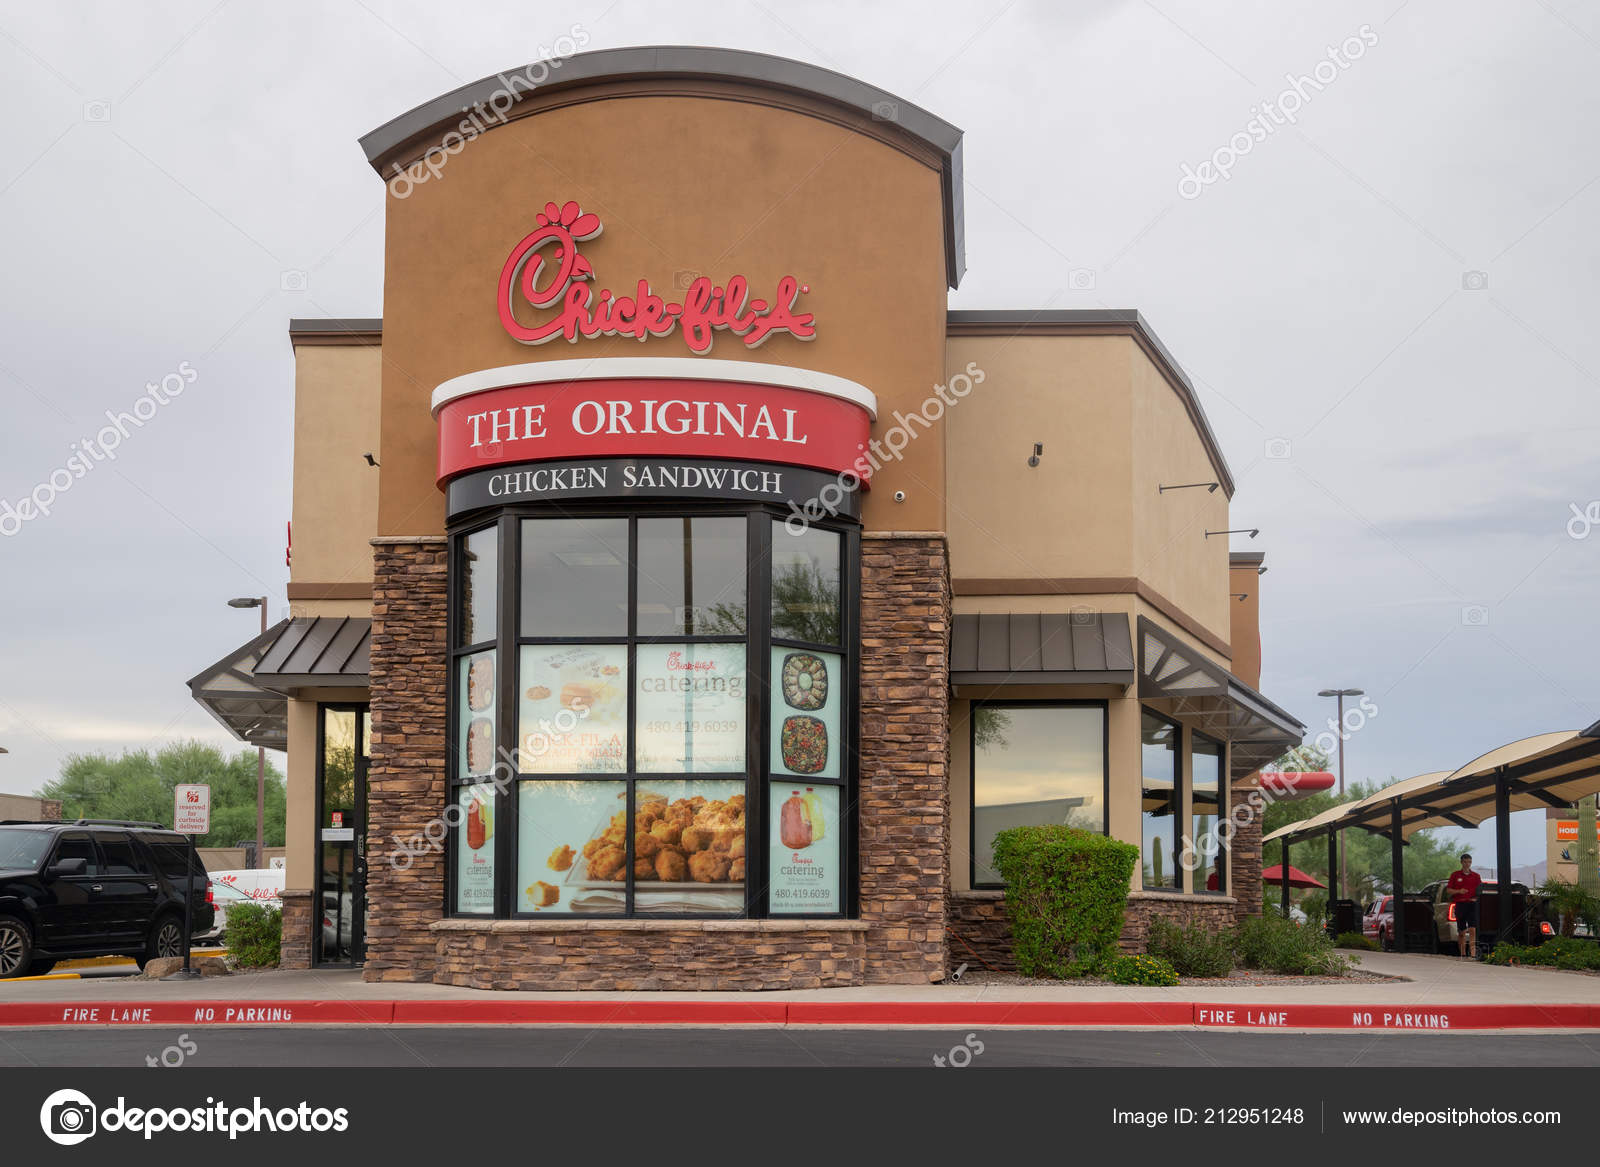 Chick-fil-A - Fast Food Restaurant in Food Court